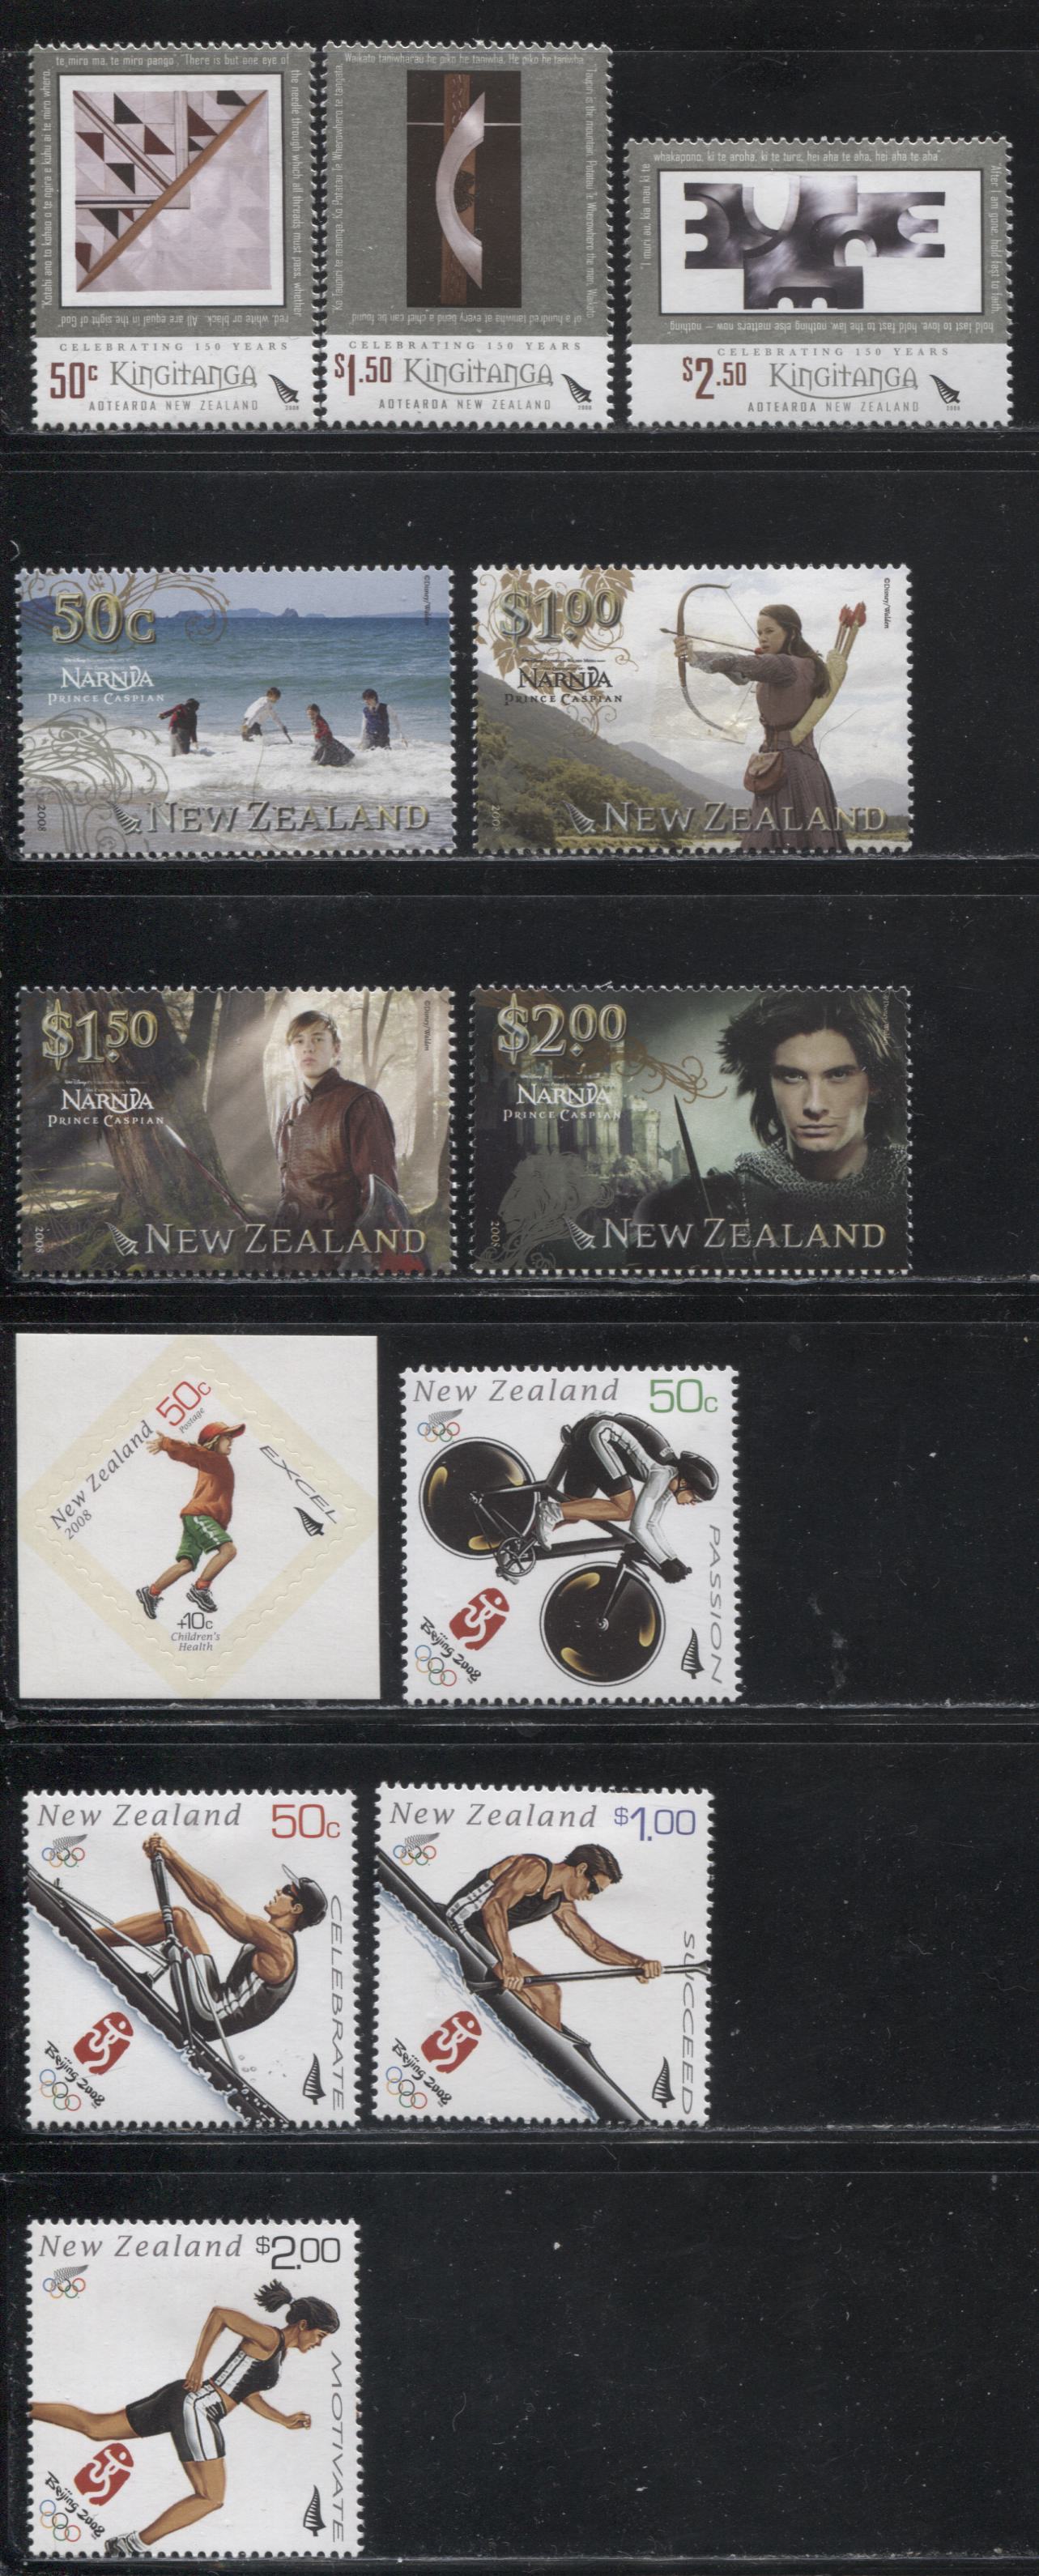 Lot 165 New Zealand SG#3038/3059 2008 Commemoratives, 3 VFOG Complete Sets, Estimated Scott Cat., based on the face values is $20